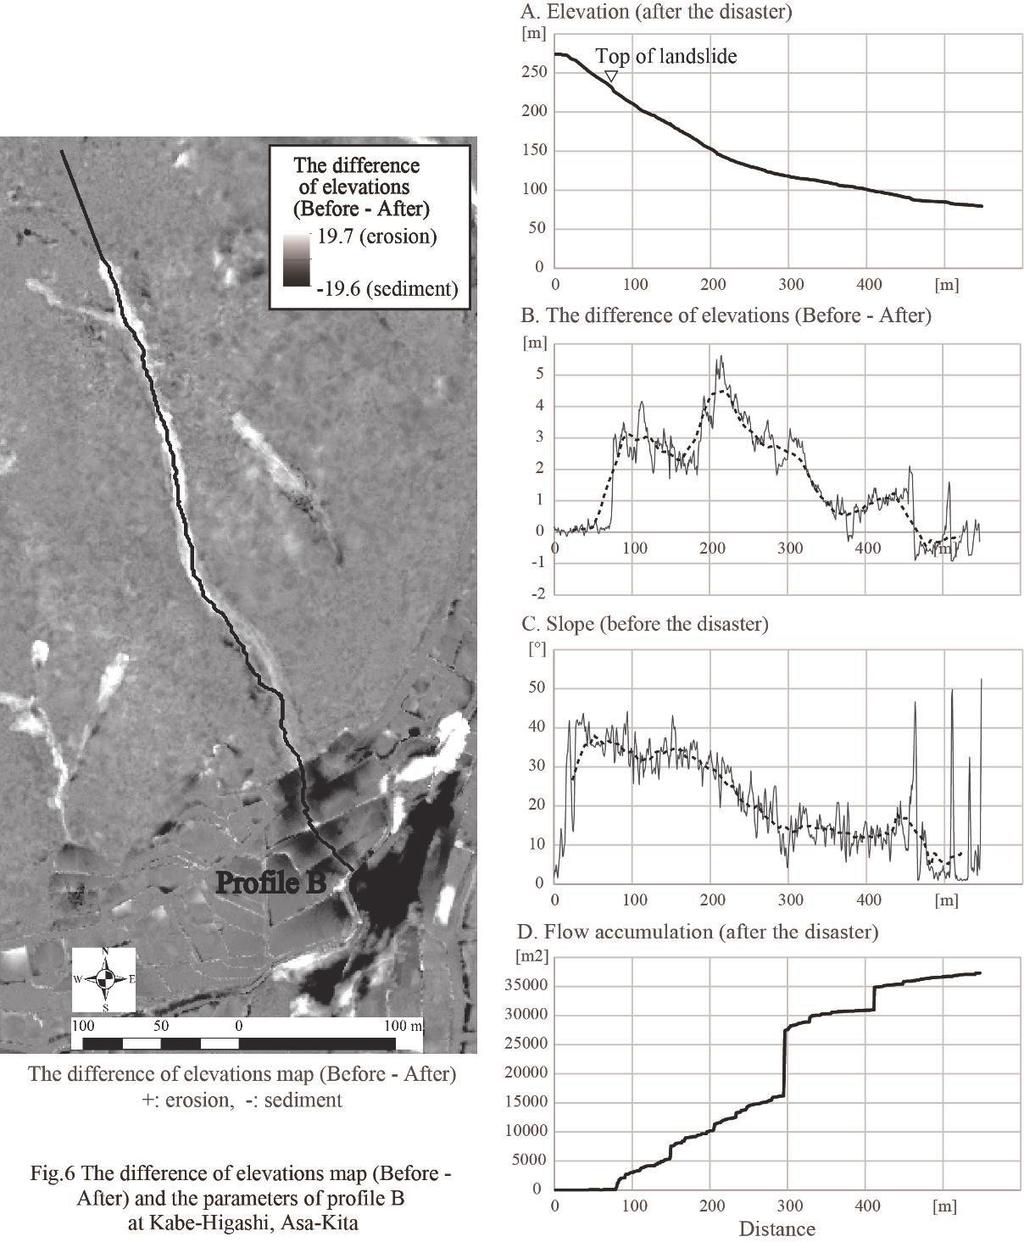 Fig.6 shows the different of elevation map (LiDAR data before the disaster after the disaster) (left figure) and the graphs which calculated the geographical features in Profile B (right figures).